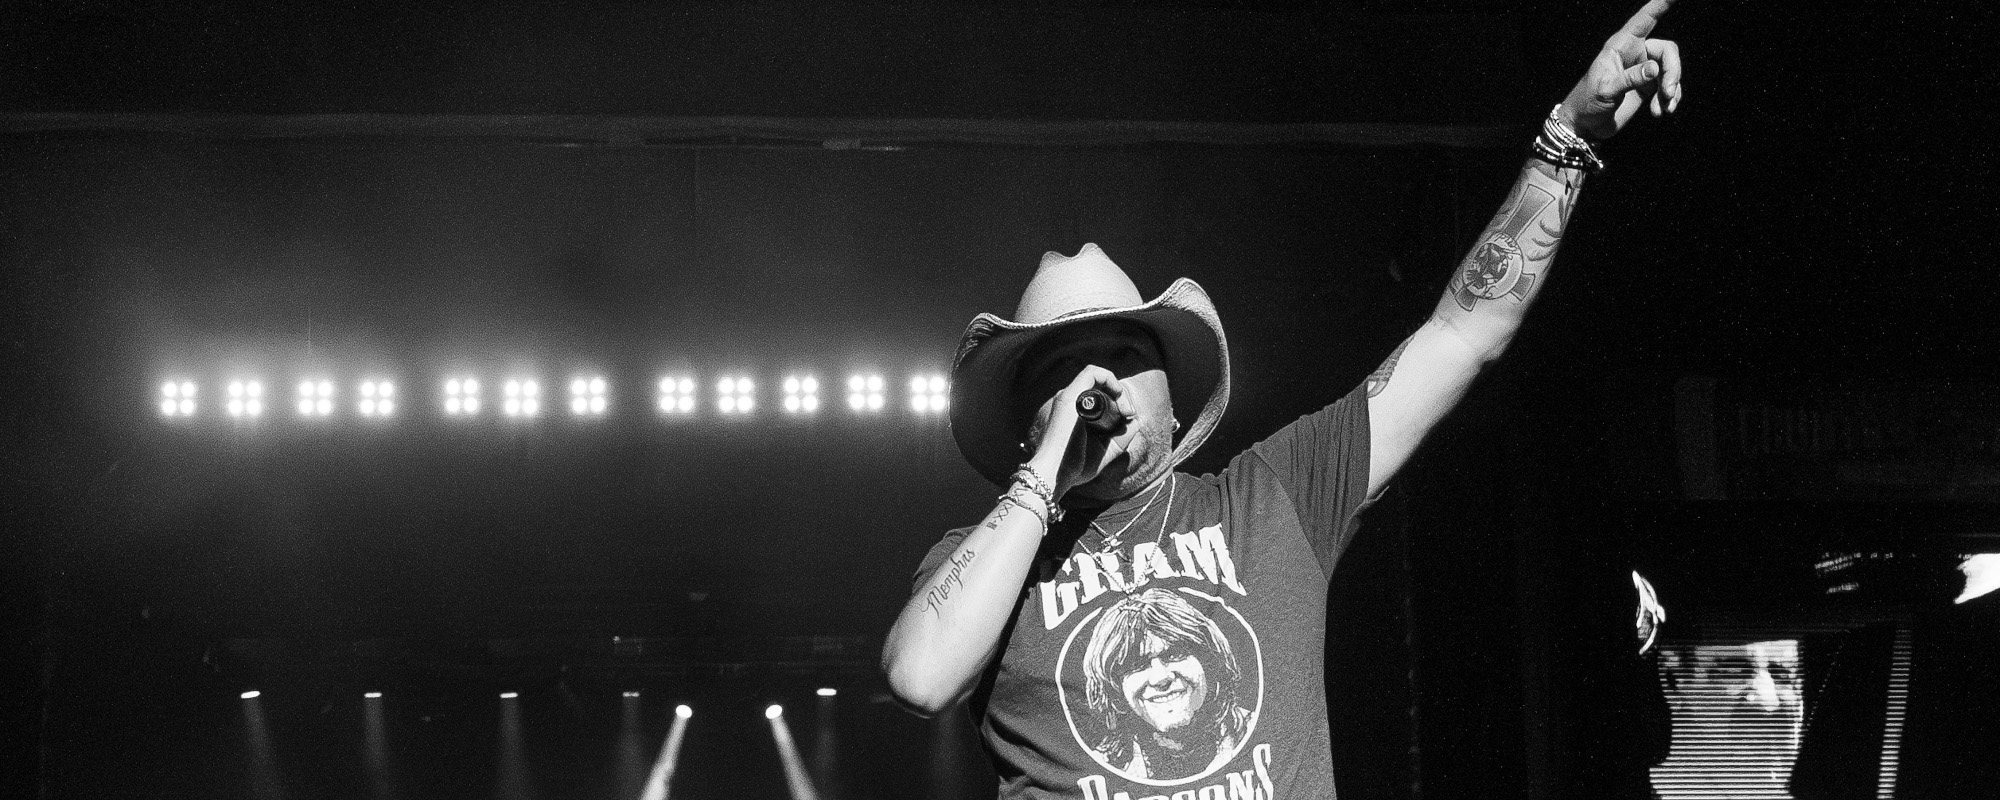 Oliver Anthony Bumps Jason Aldean’s “Try That in a Small Town” on Country Chart